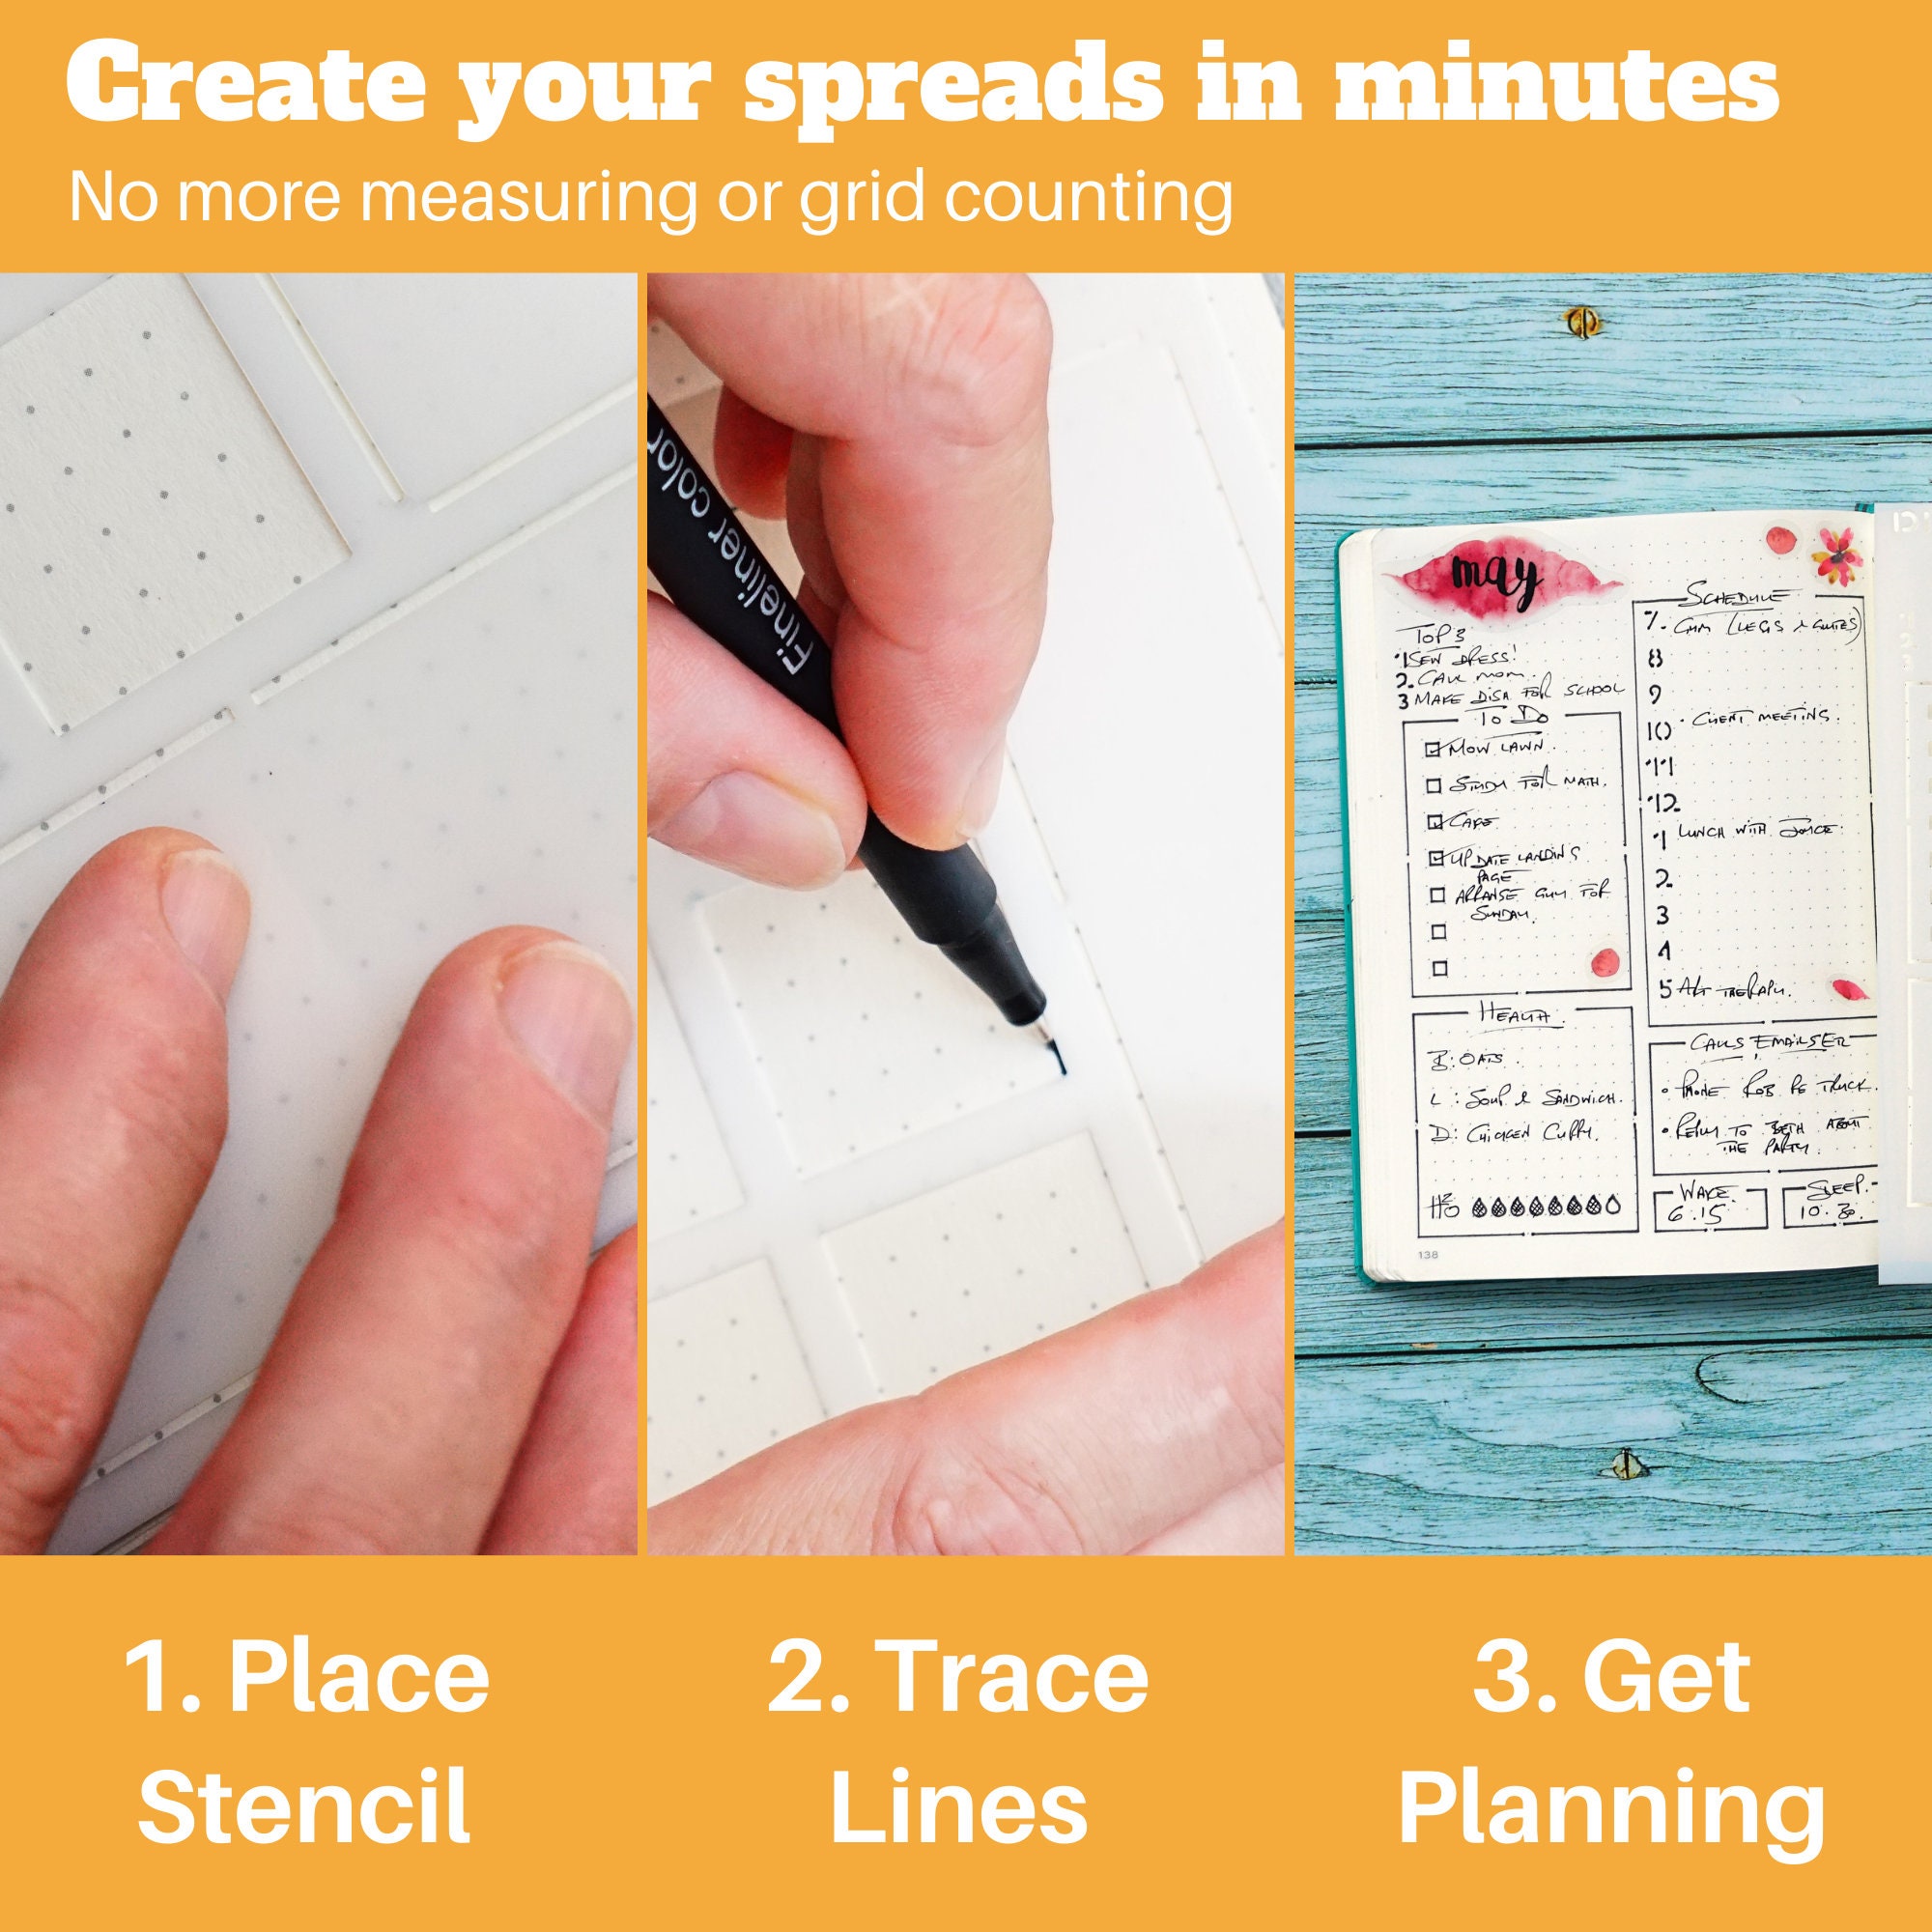 Speedy Spreads Journal Stencils - All Layouts Bundle (24 Stencils) - A5 Planner Layouts for Weekly or Monthly Bullet Journal Spreads